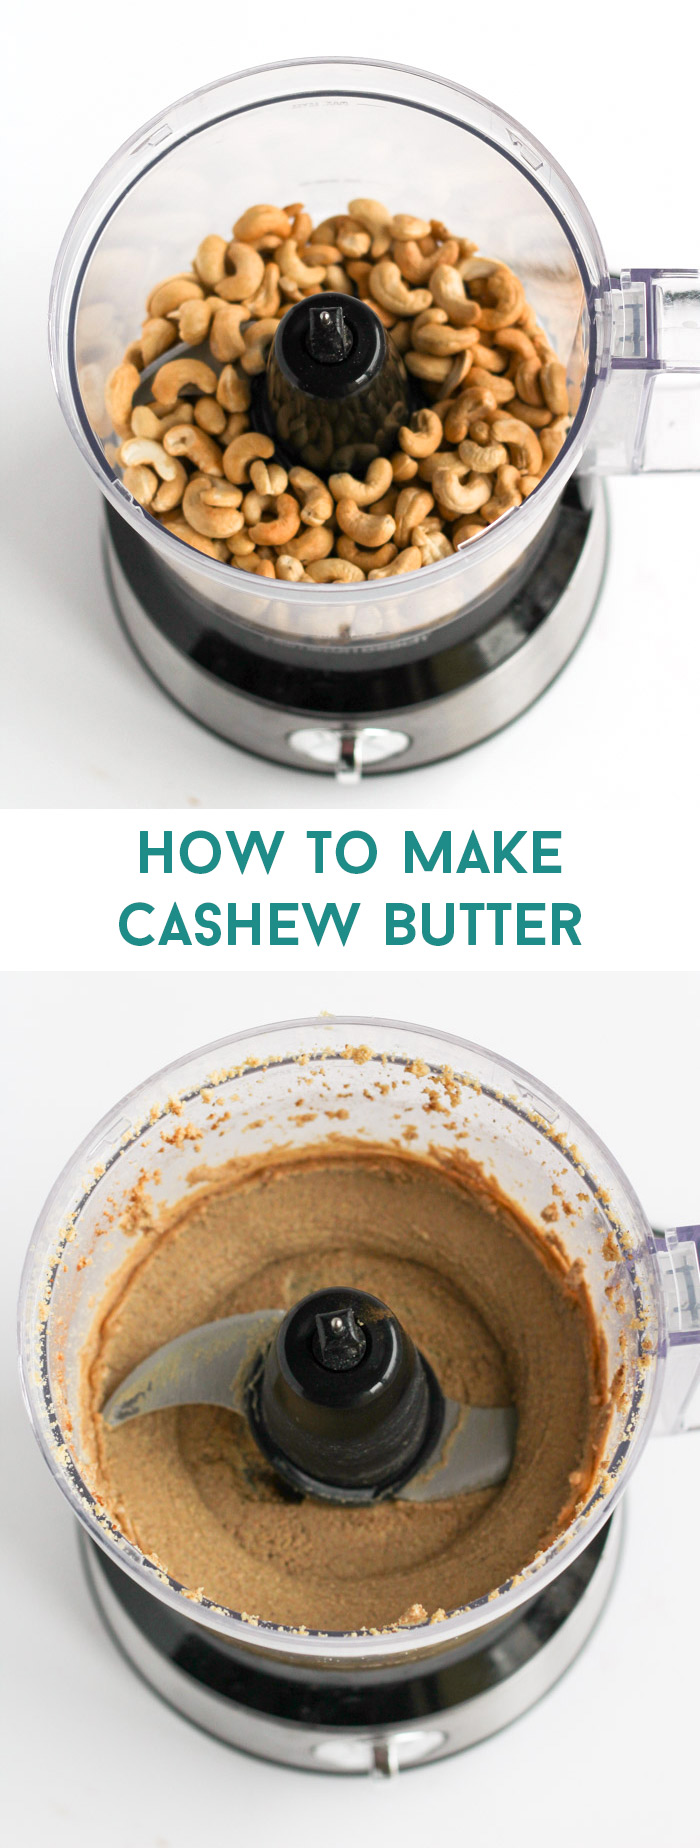 Homemade cashew butter that tastes  reminiscent of cookie butter. Your new favorite nut butter that's easy to make! | thebalancedberry.com #vegan #paleo